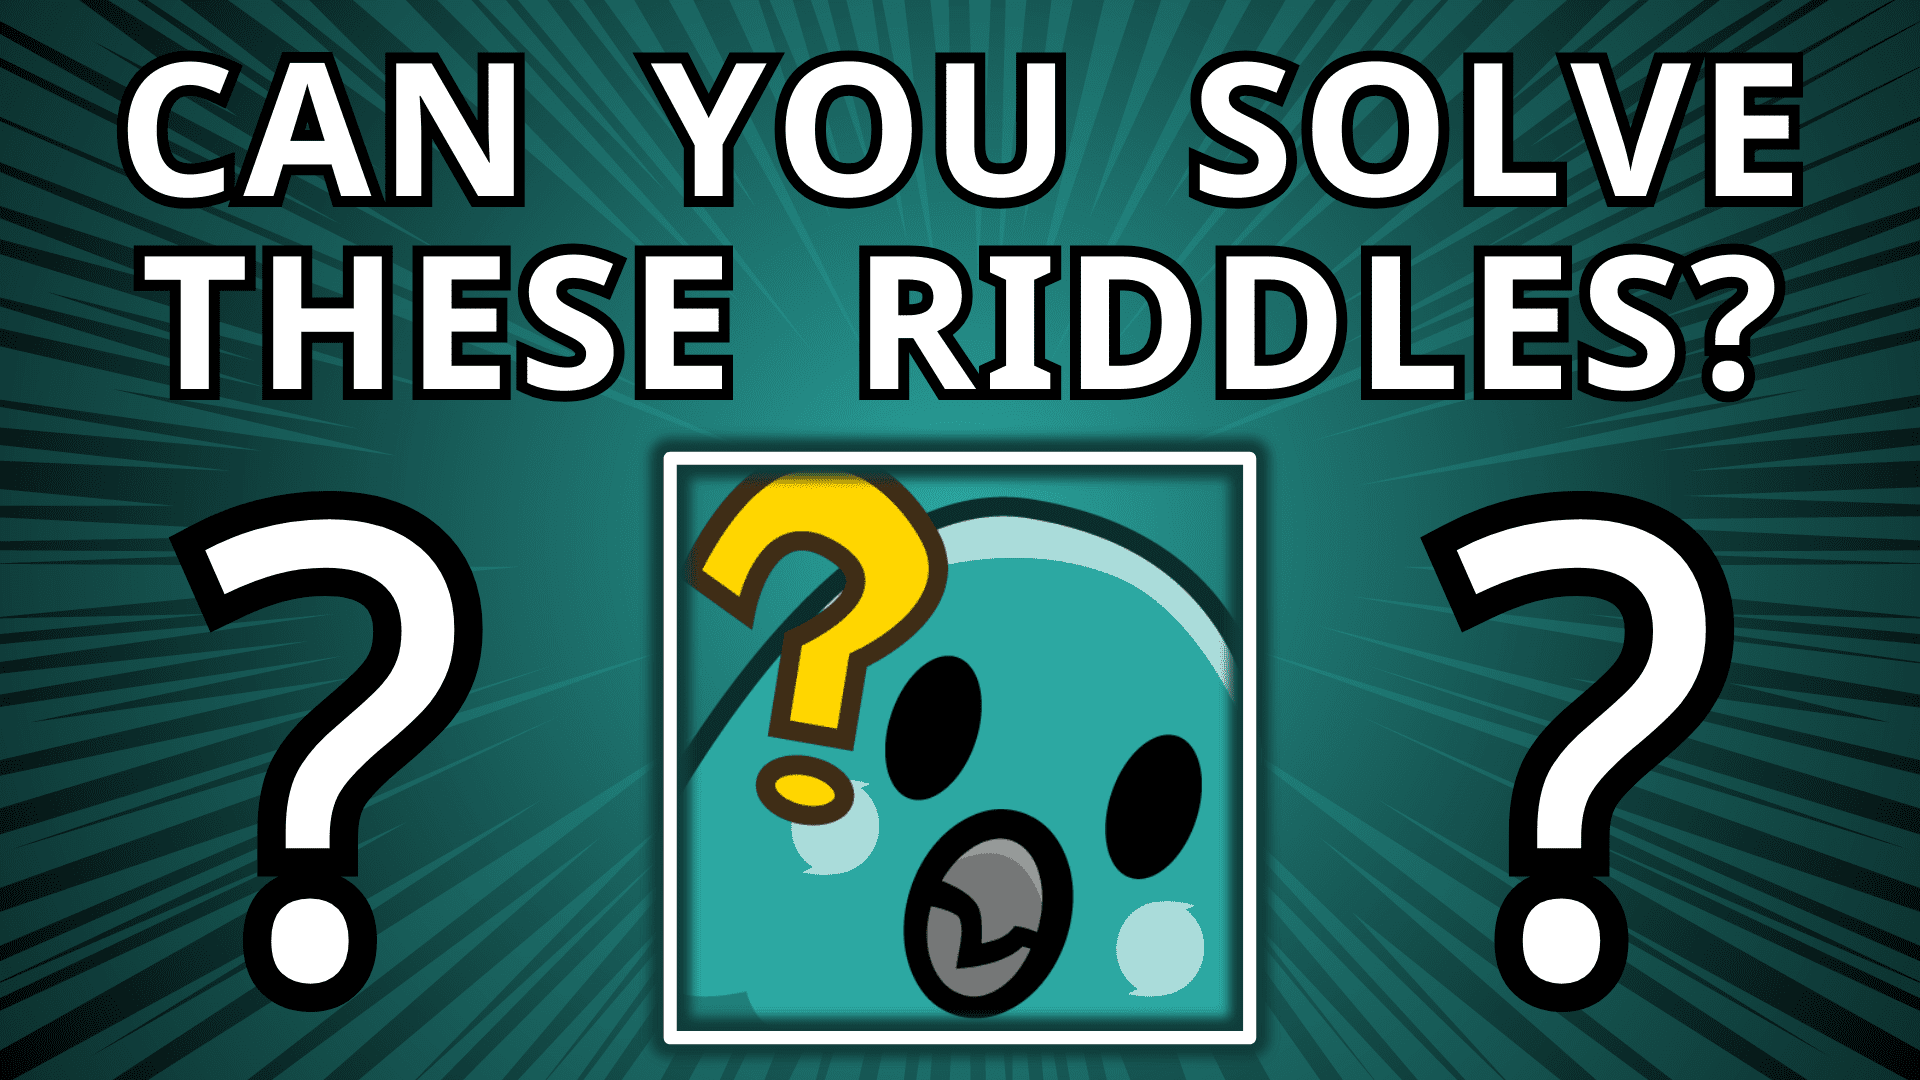 A teal confused parrot emote with three question marks. The text "Can you solve these riddles?" against a striking teal comic book background. This introduces our good riddles with answers for kids.